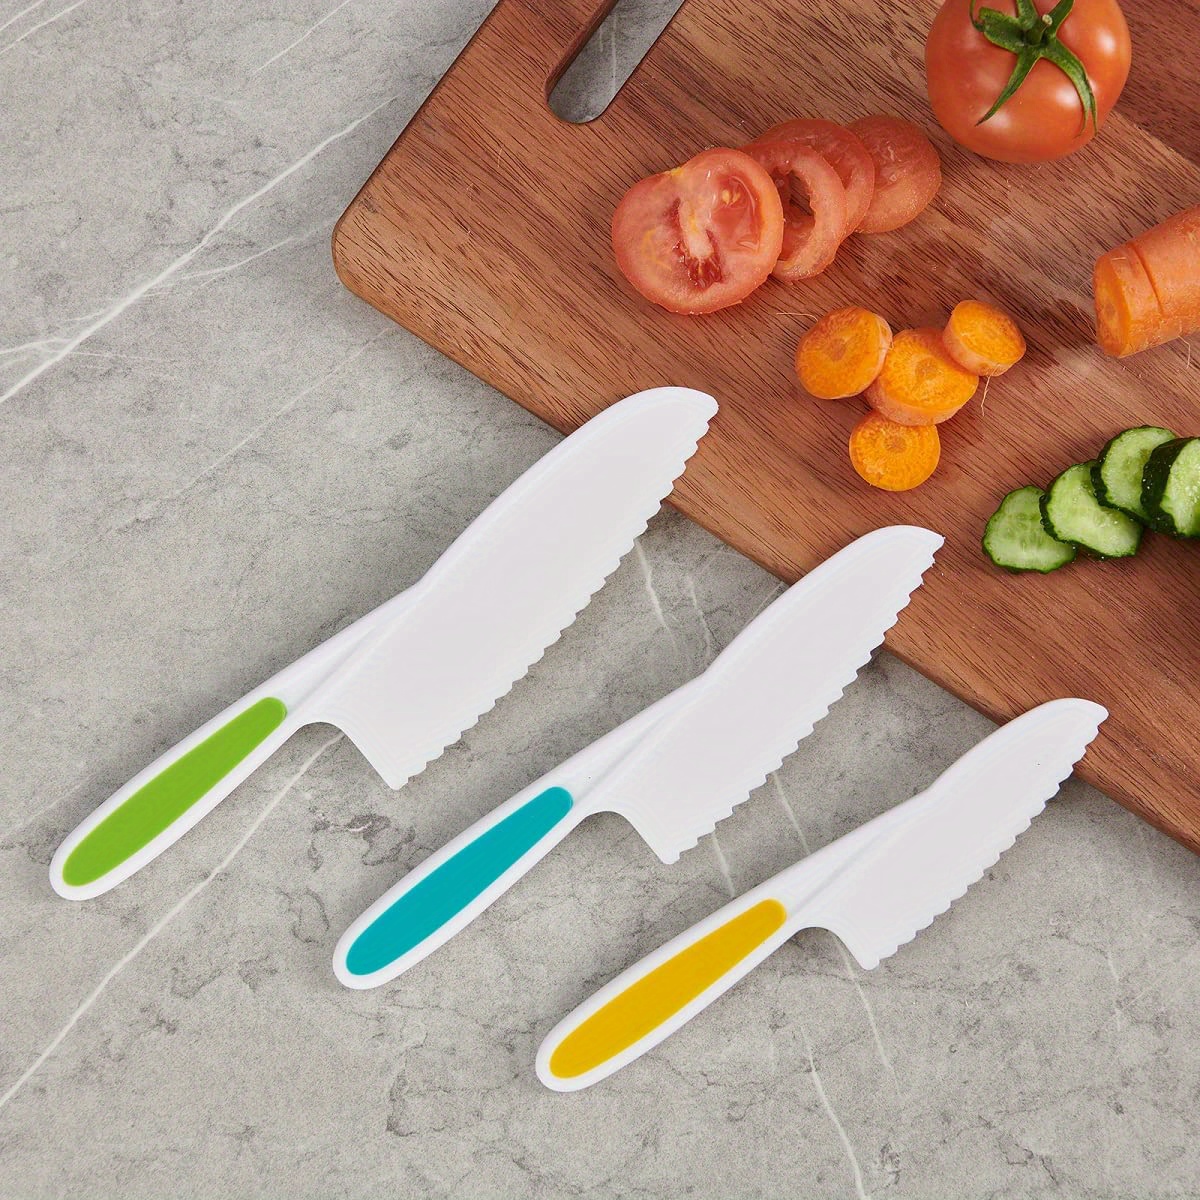 GONEJALL Kids Knife Set for Real Cooking, 4 Pieces Toddler Knife Set, Nylon  Kitchen Baking Knife with Cutting Board, Firm Grip, Serrated Edges Kids